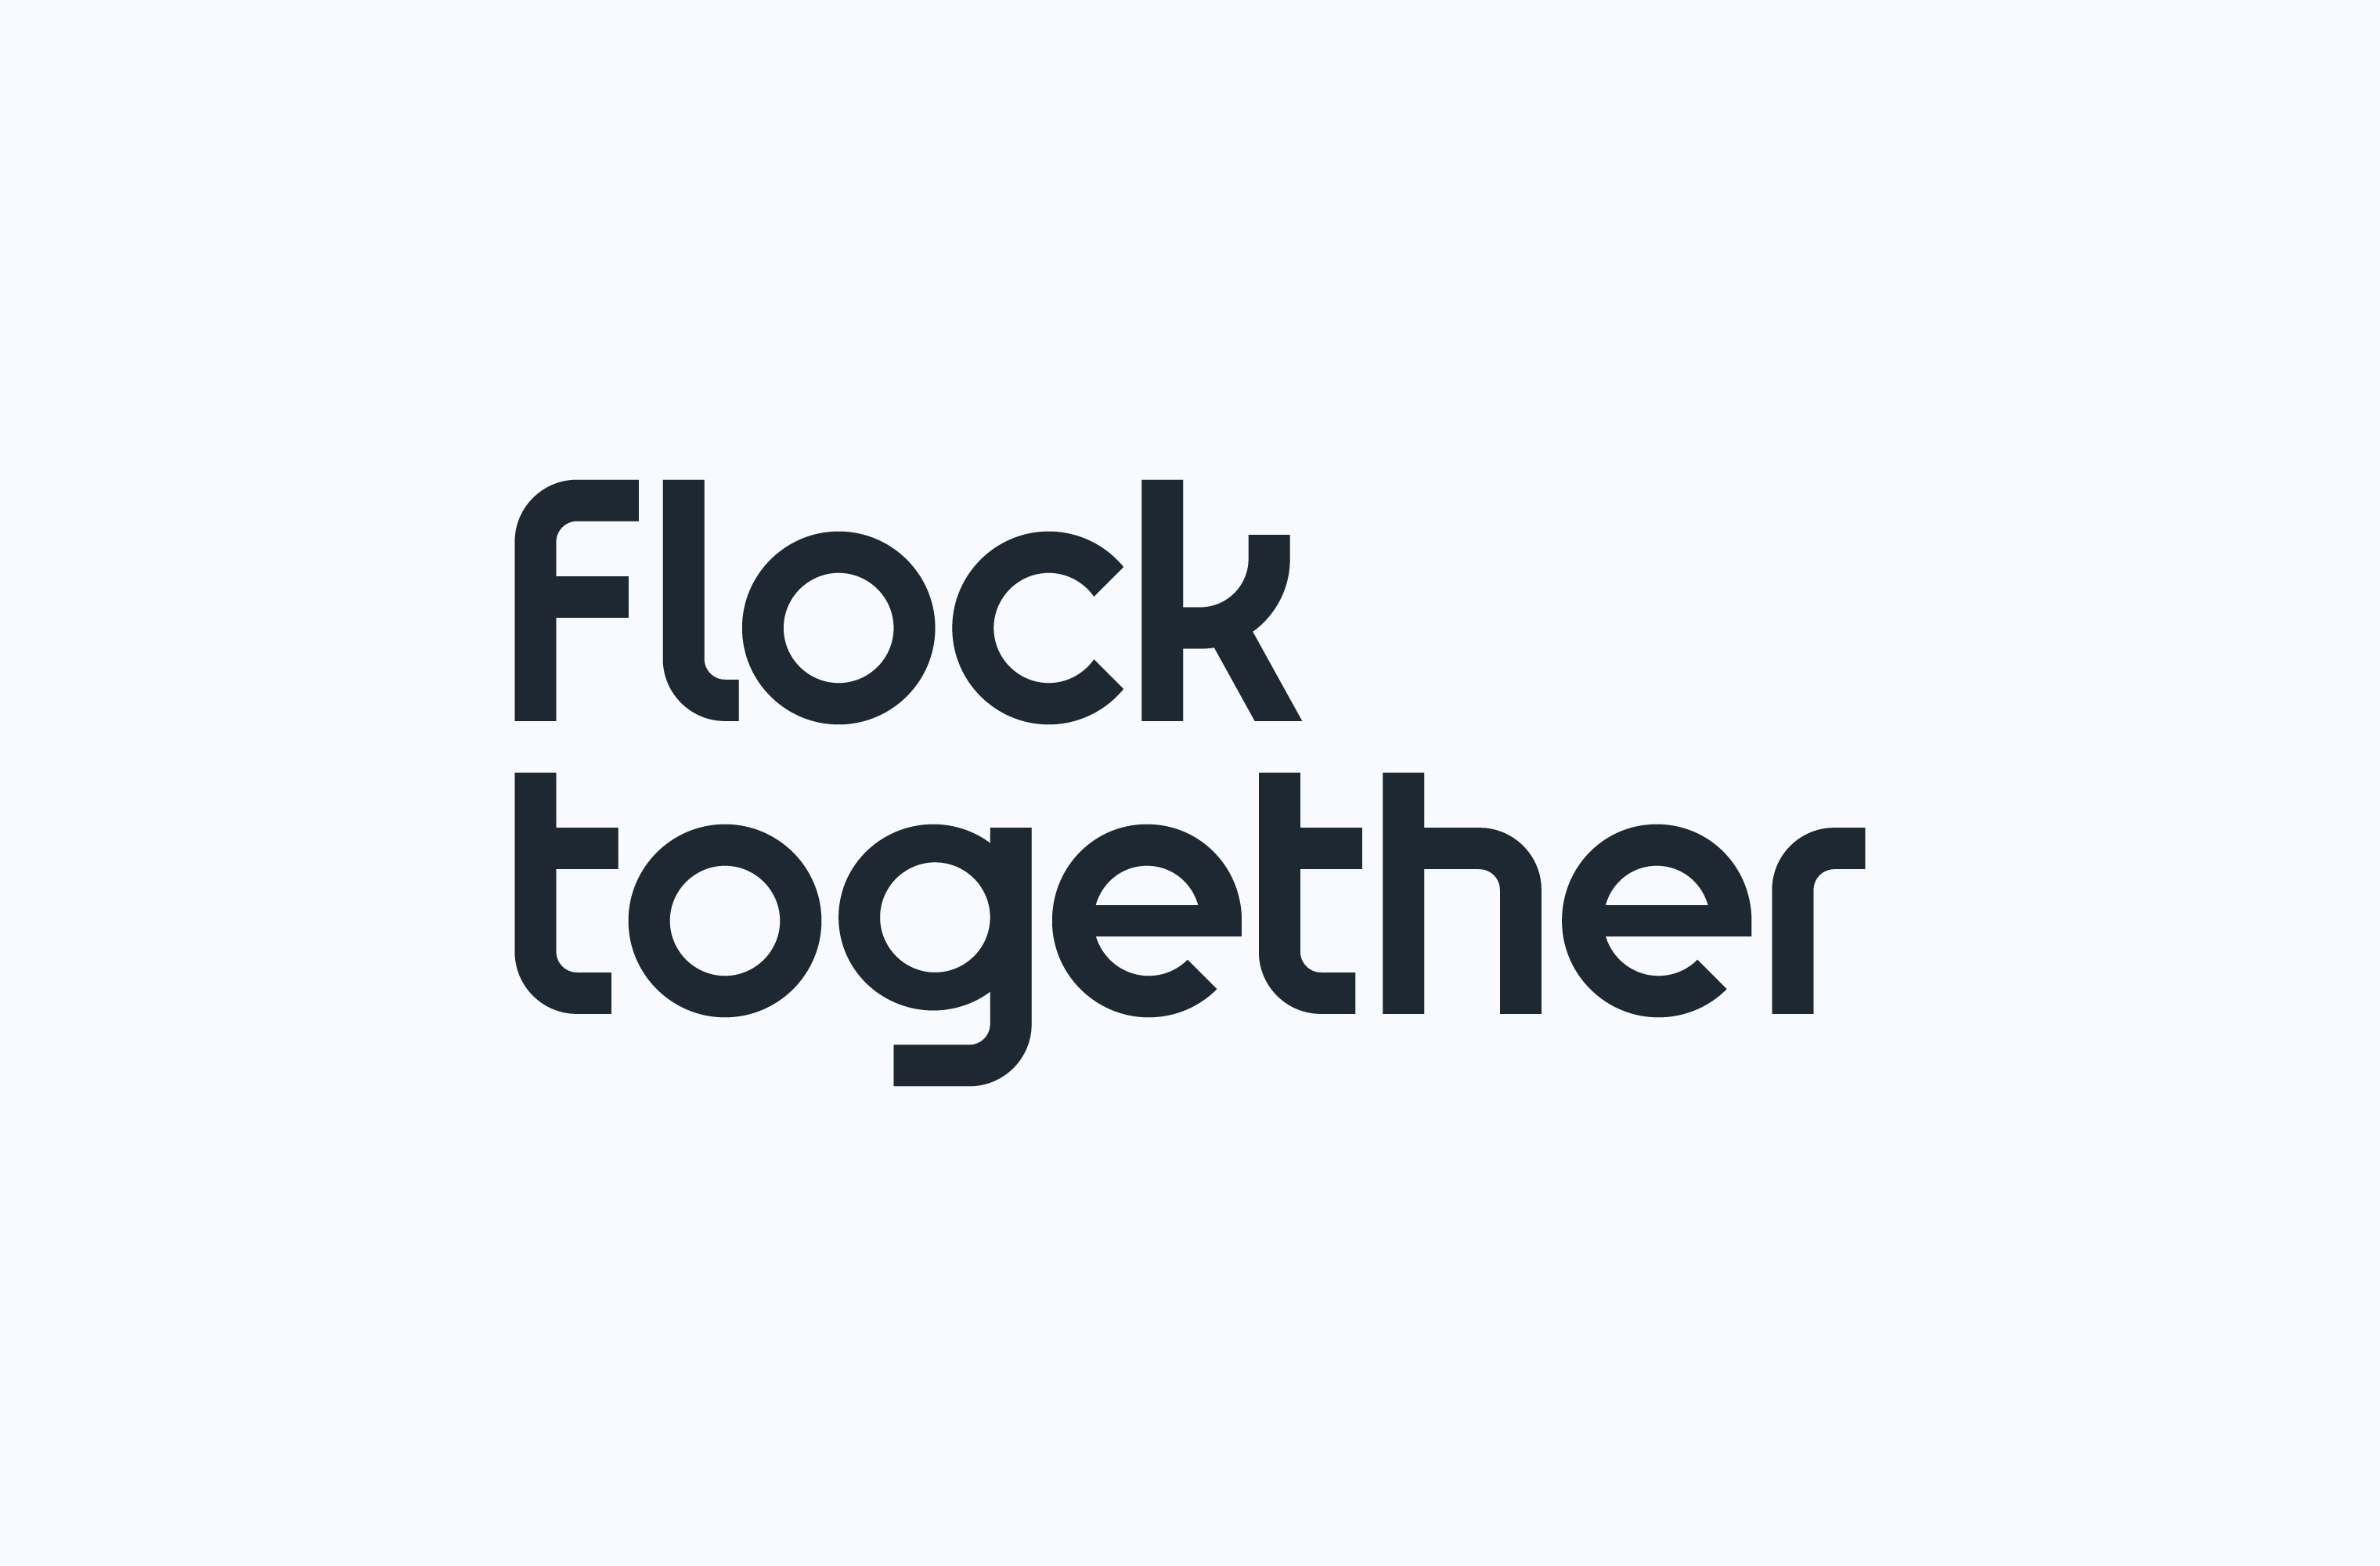 Charcoal Flock Together wordmark on a white background